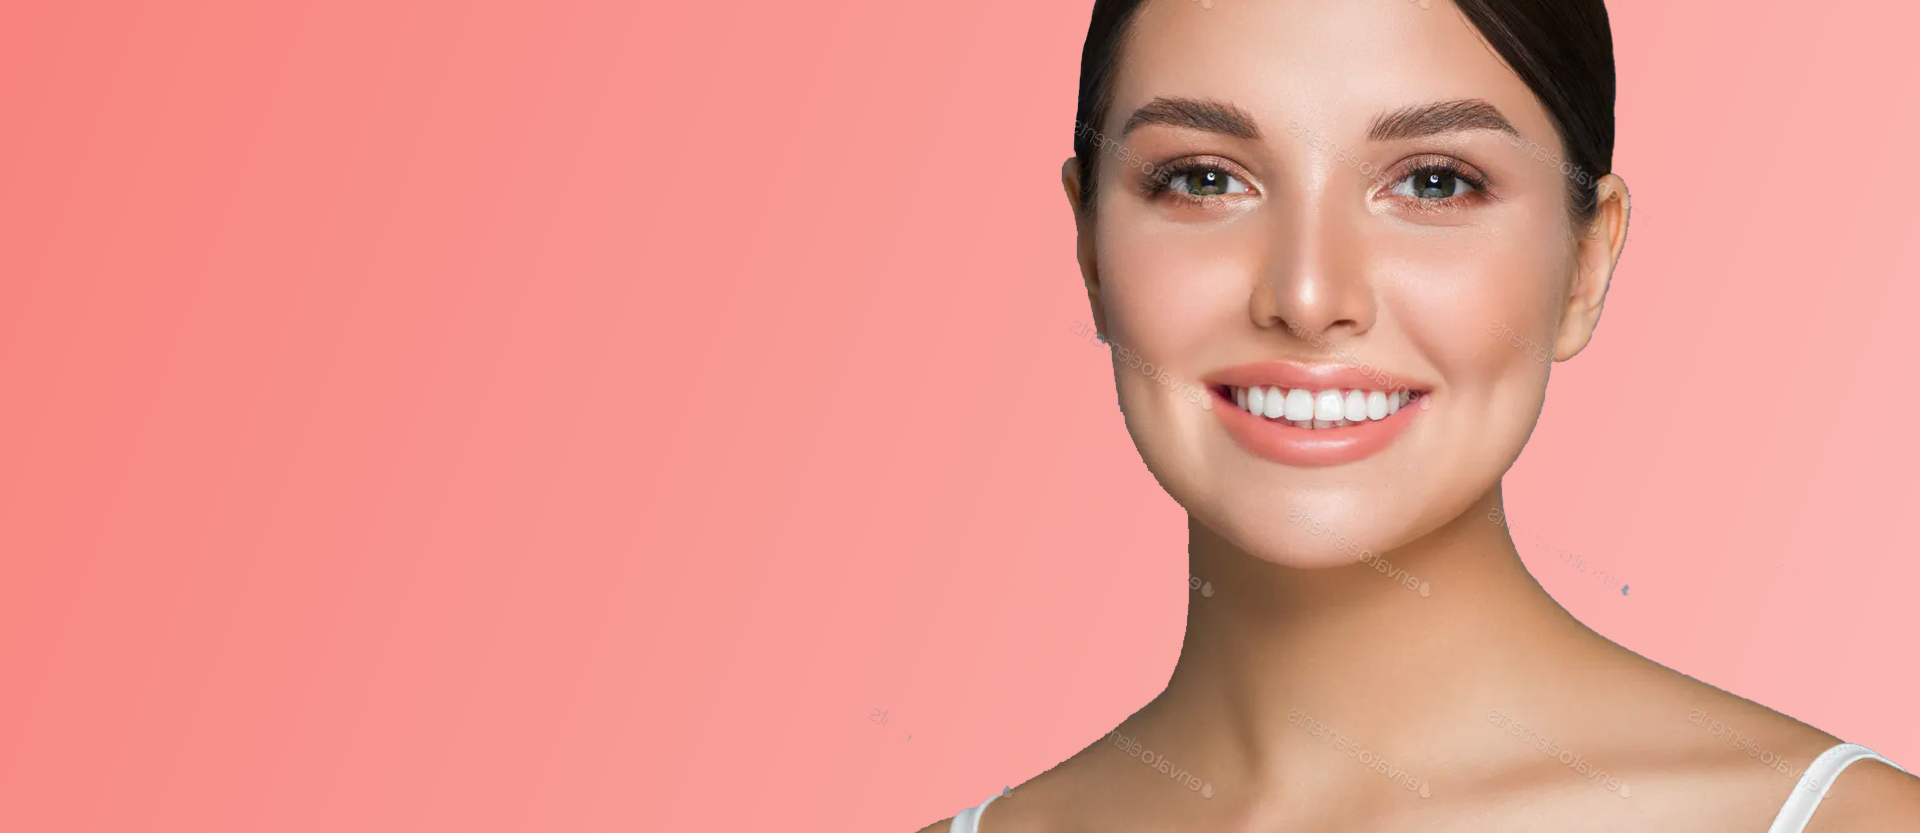 A beautiful women with a smile makeover, smiling